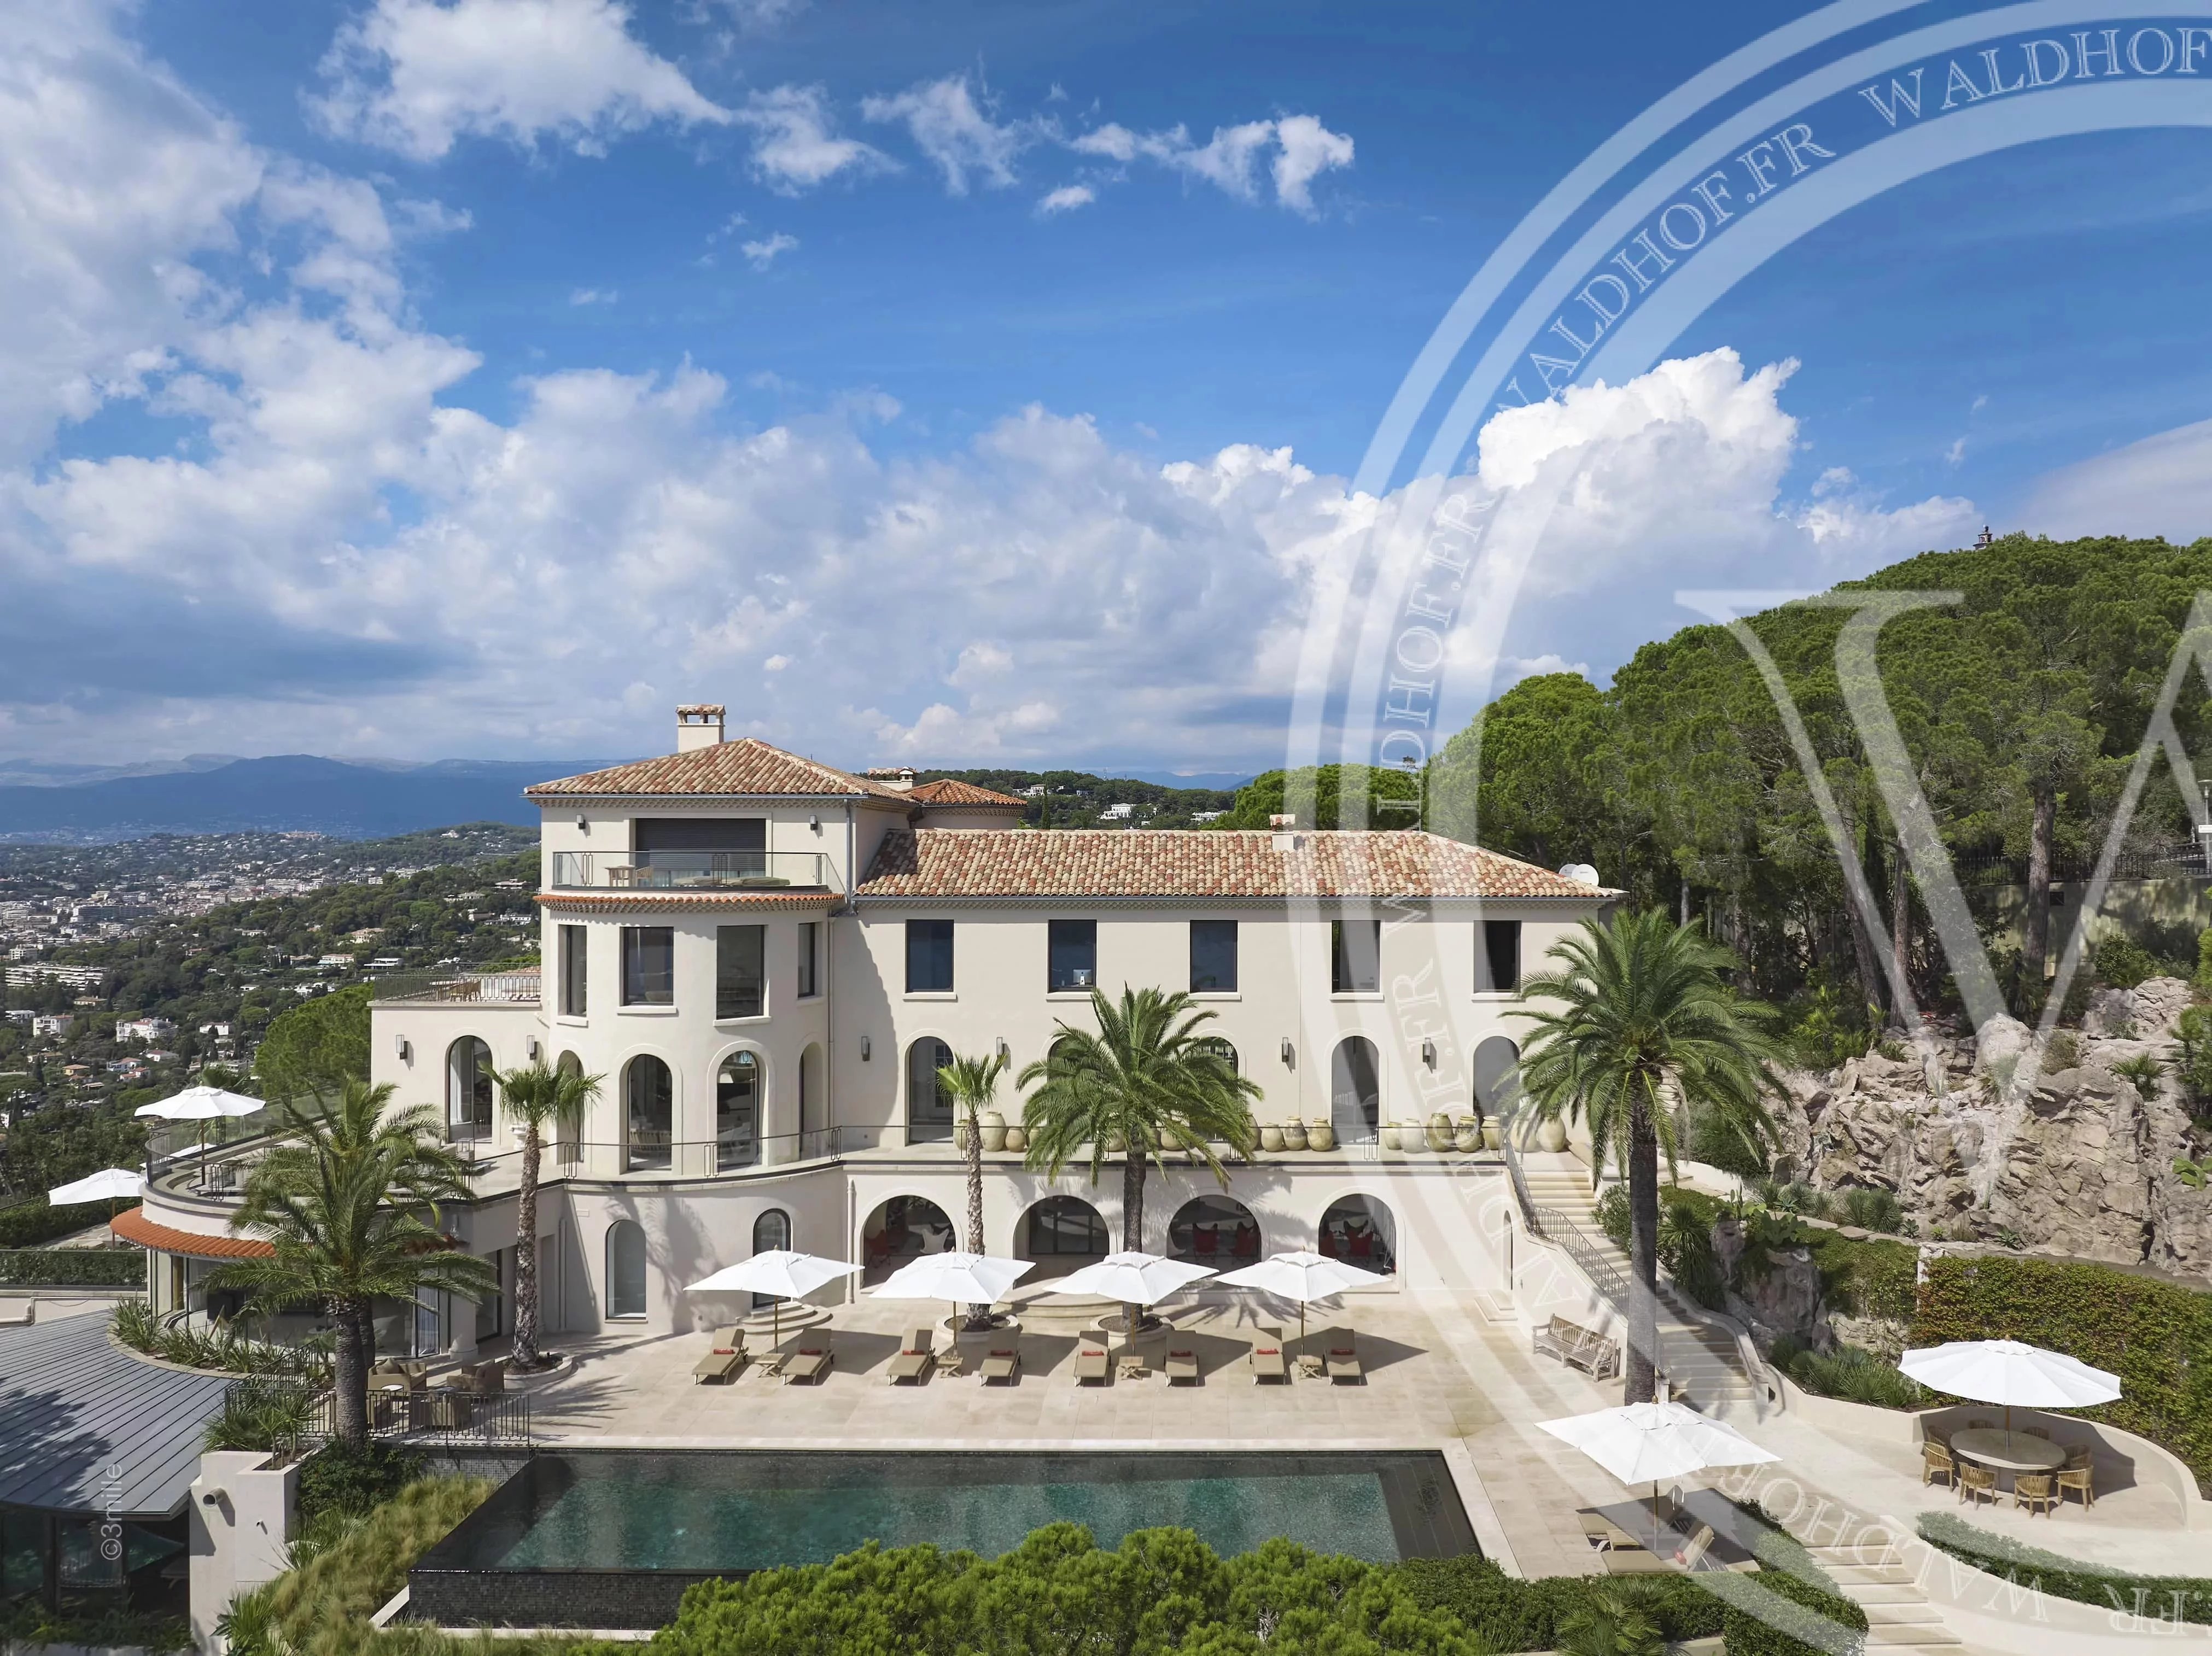 Fully renovated 3,000 m2 Palace overlooking all of Cannes